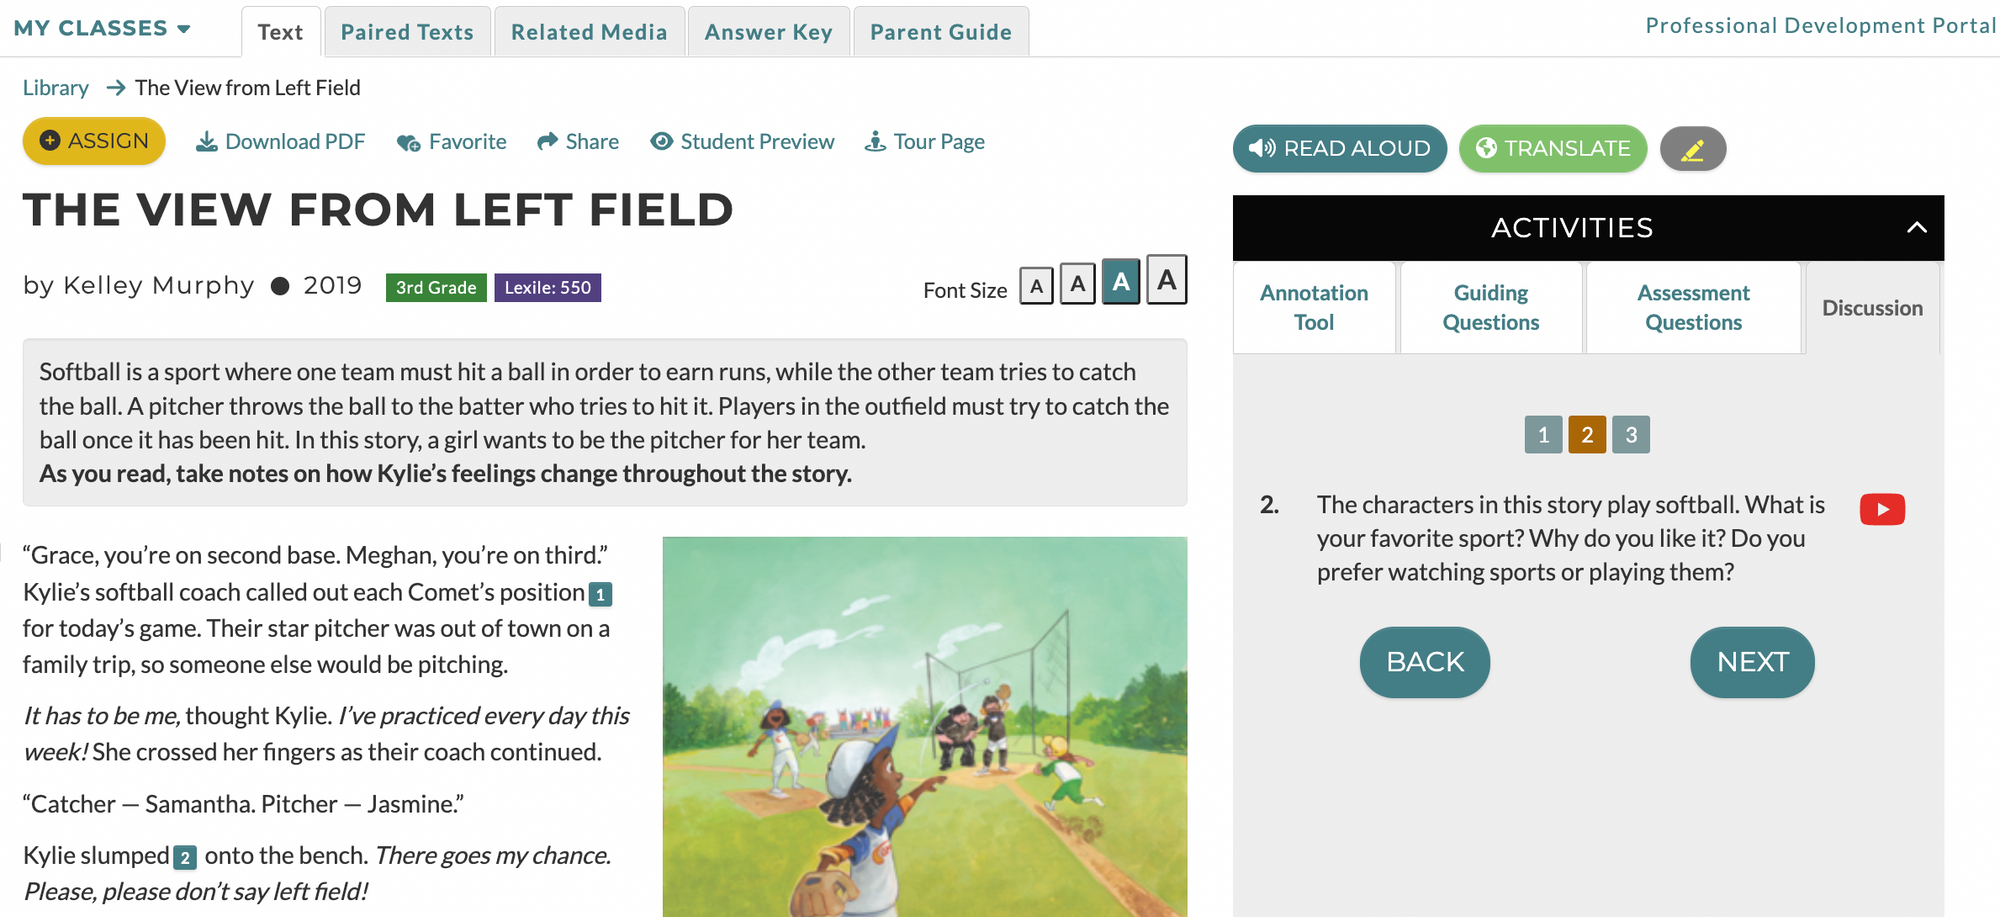 A screenshot of Discussion Questions 2 for CommonLit's text "The View from Left Field"